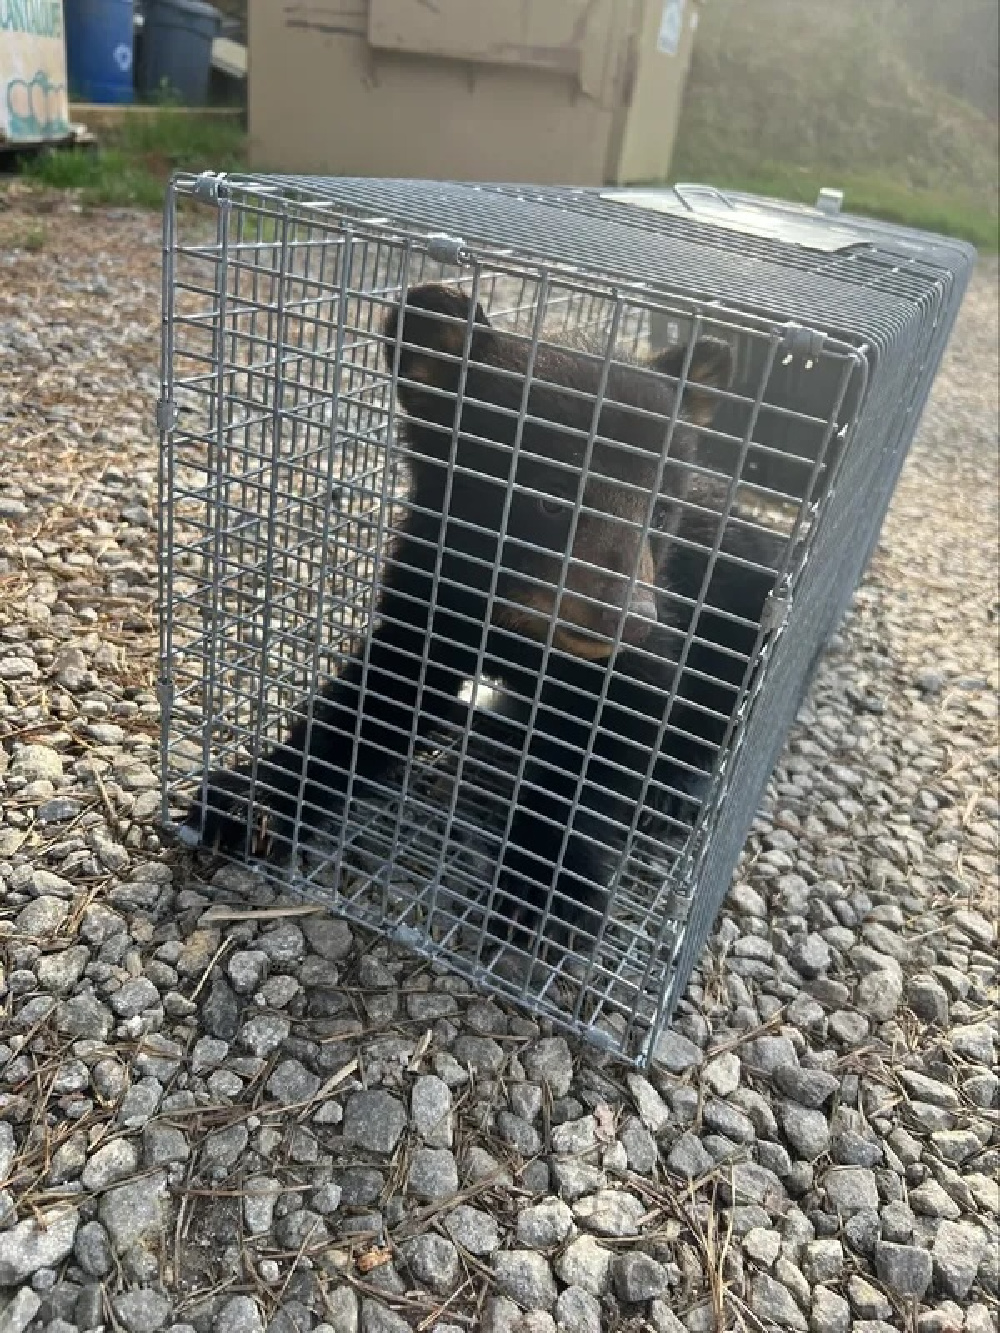 An injured black bear cub is captured in a cage.